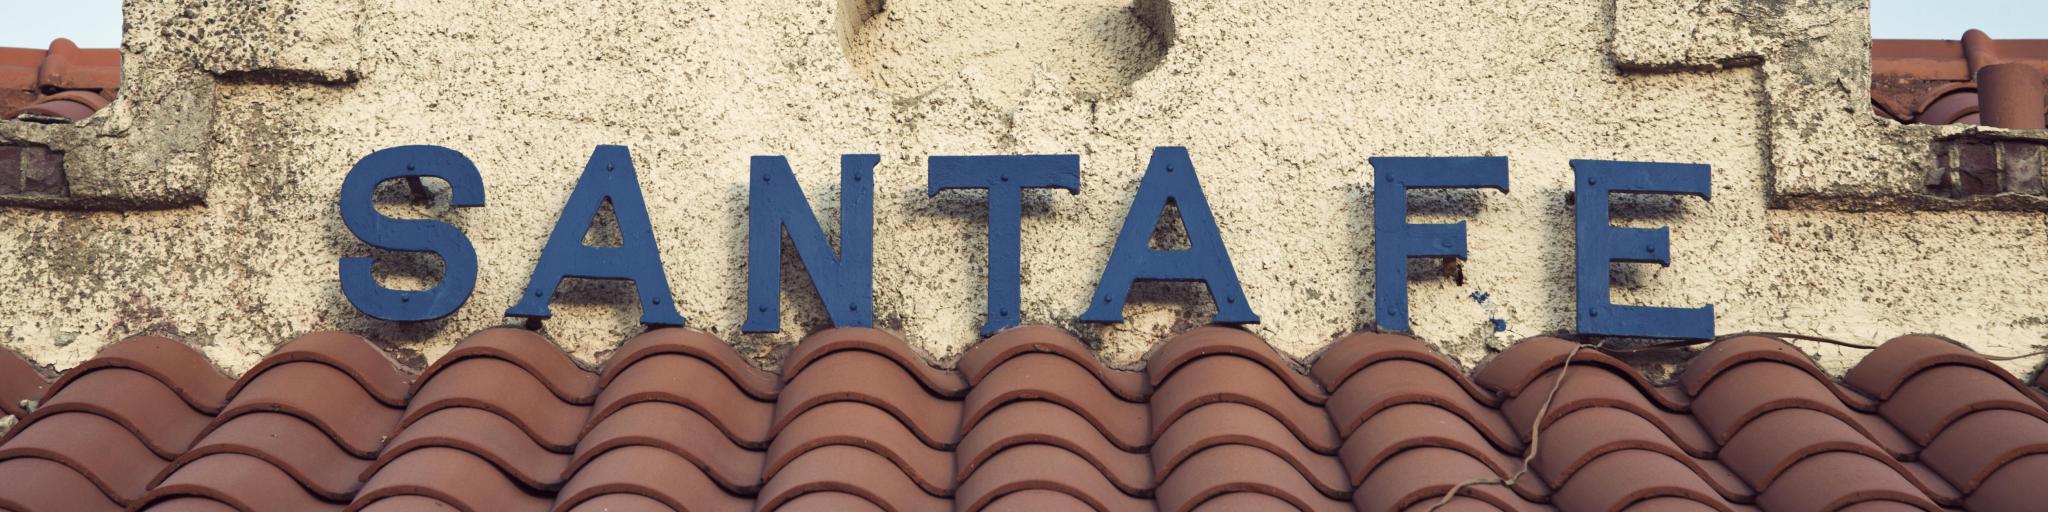 Sign for Santa Fe atop the historic railway station building, located in the city's downtown area